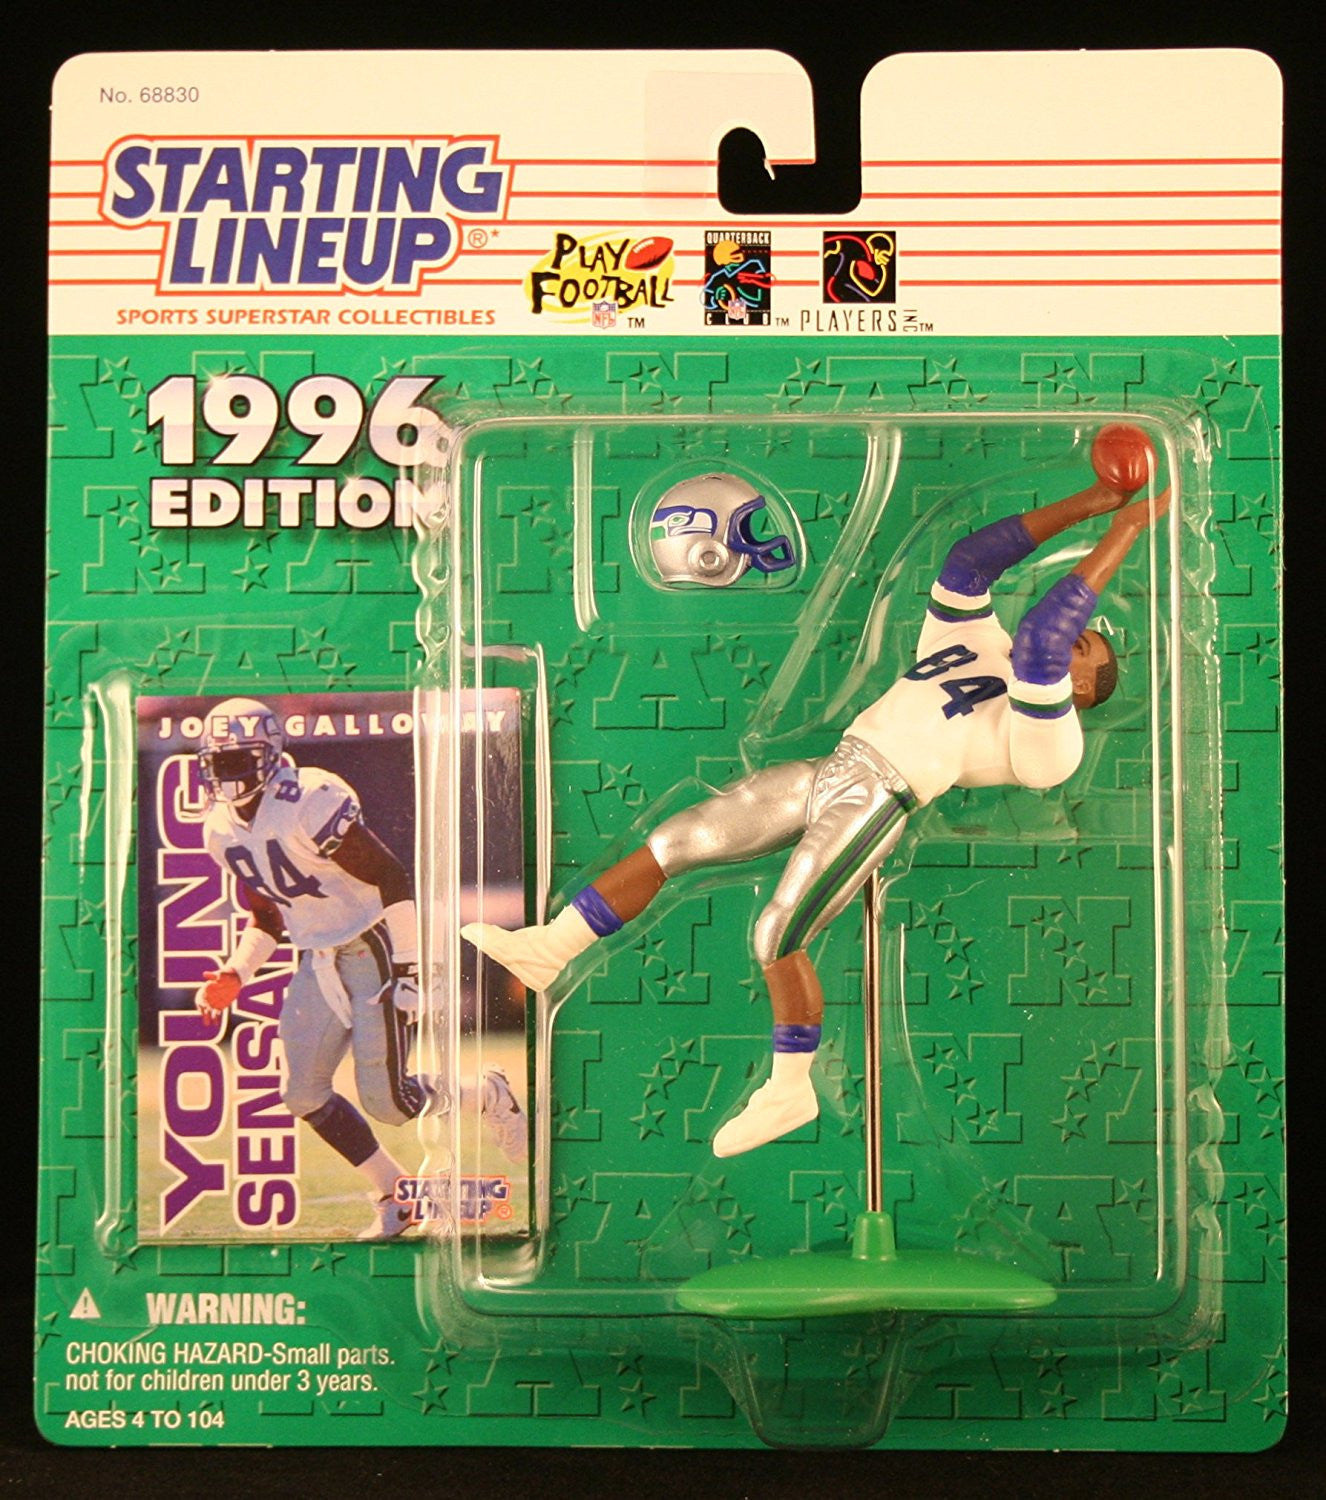 JOEY GALLOWAY / SEATTLE SEAHAWKS 1996 NFL Starting Lineup Action Figure & Exclusive NFL Collector Trading Card